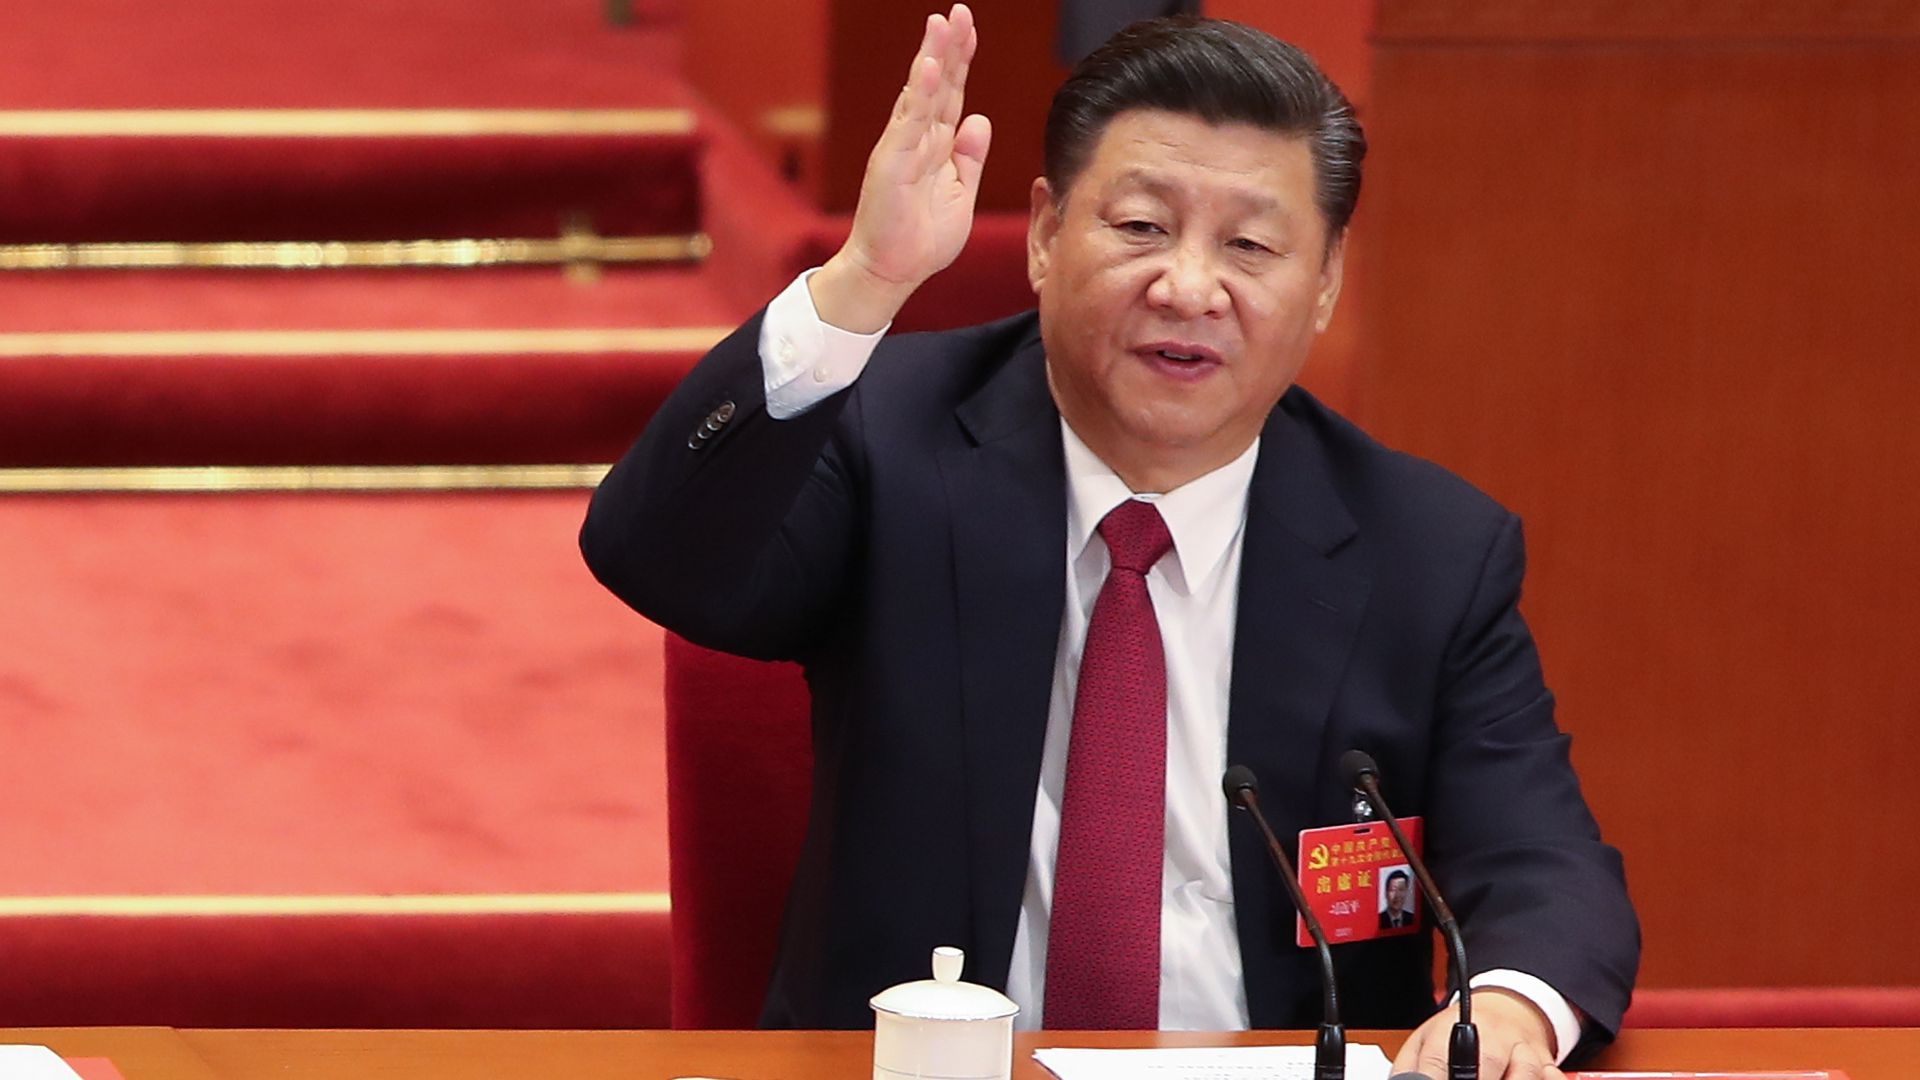 Chinese President Xi Jinping raises his hand